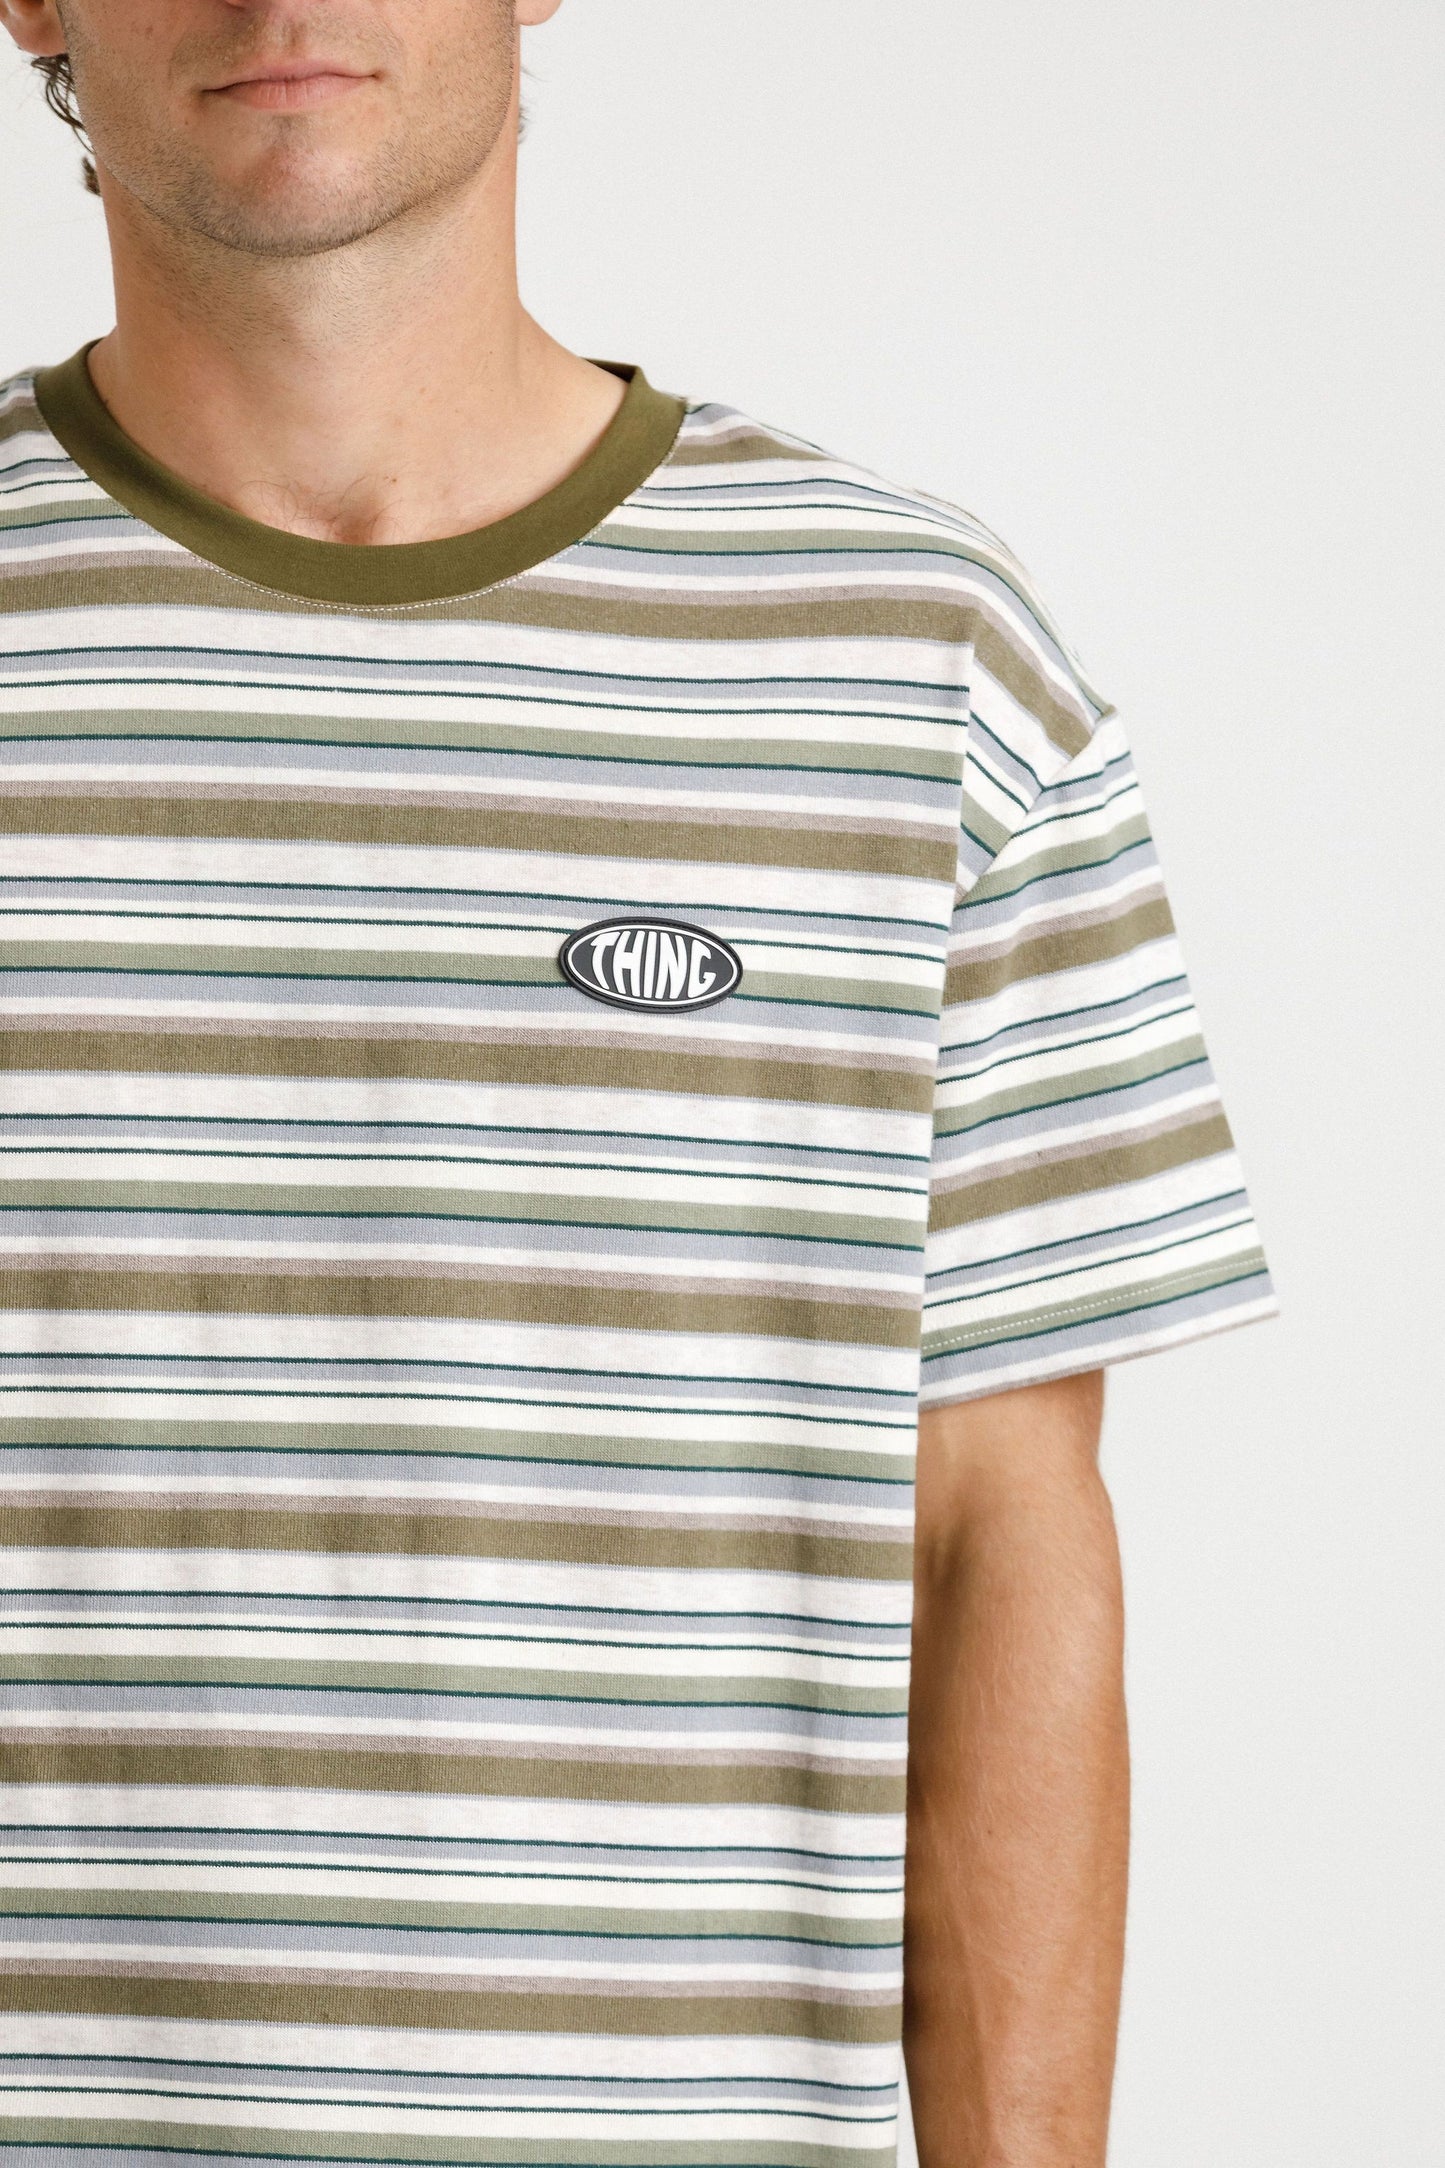 THING THING Ample Tee Earth Stripe